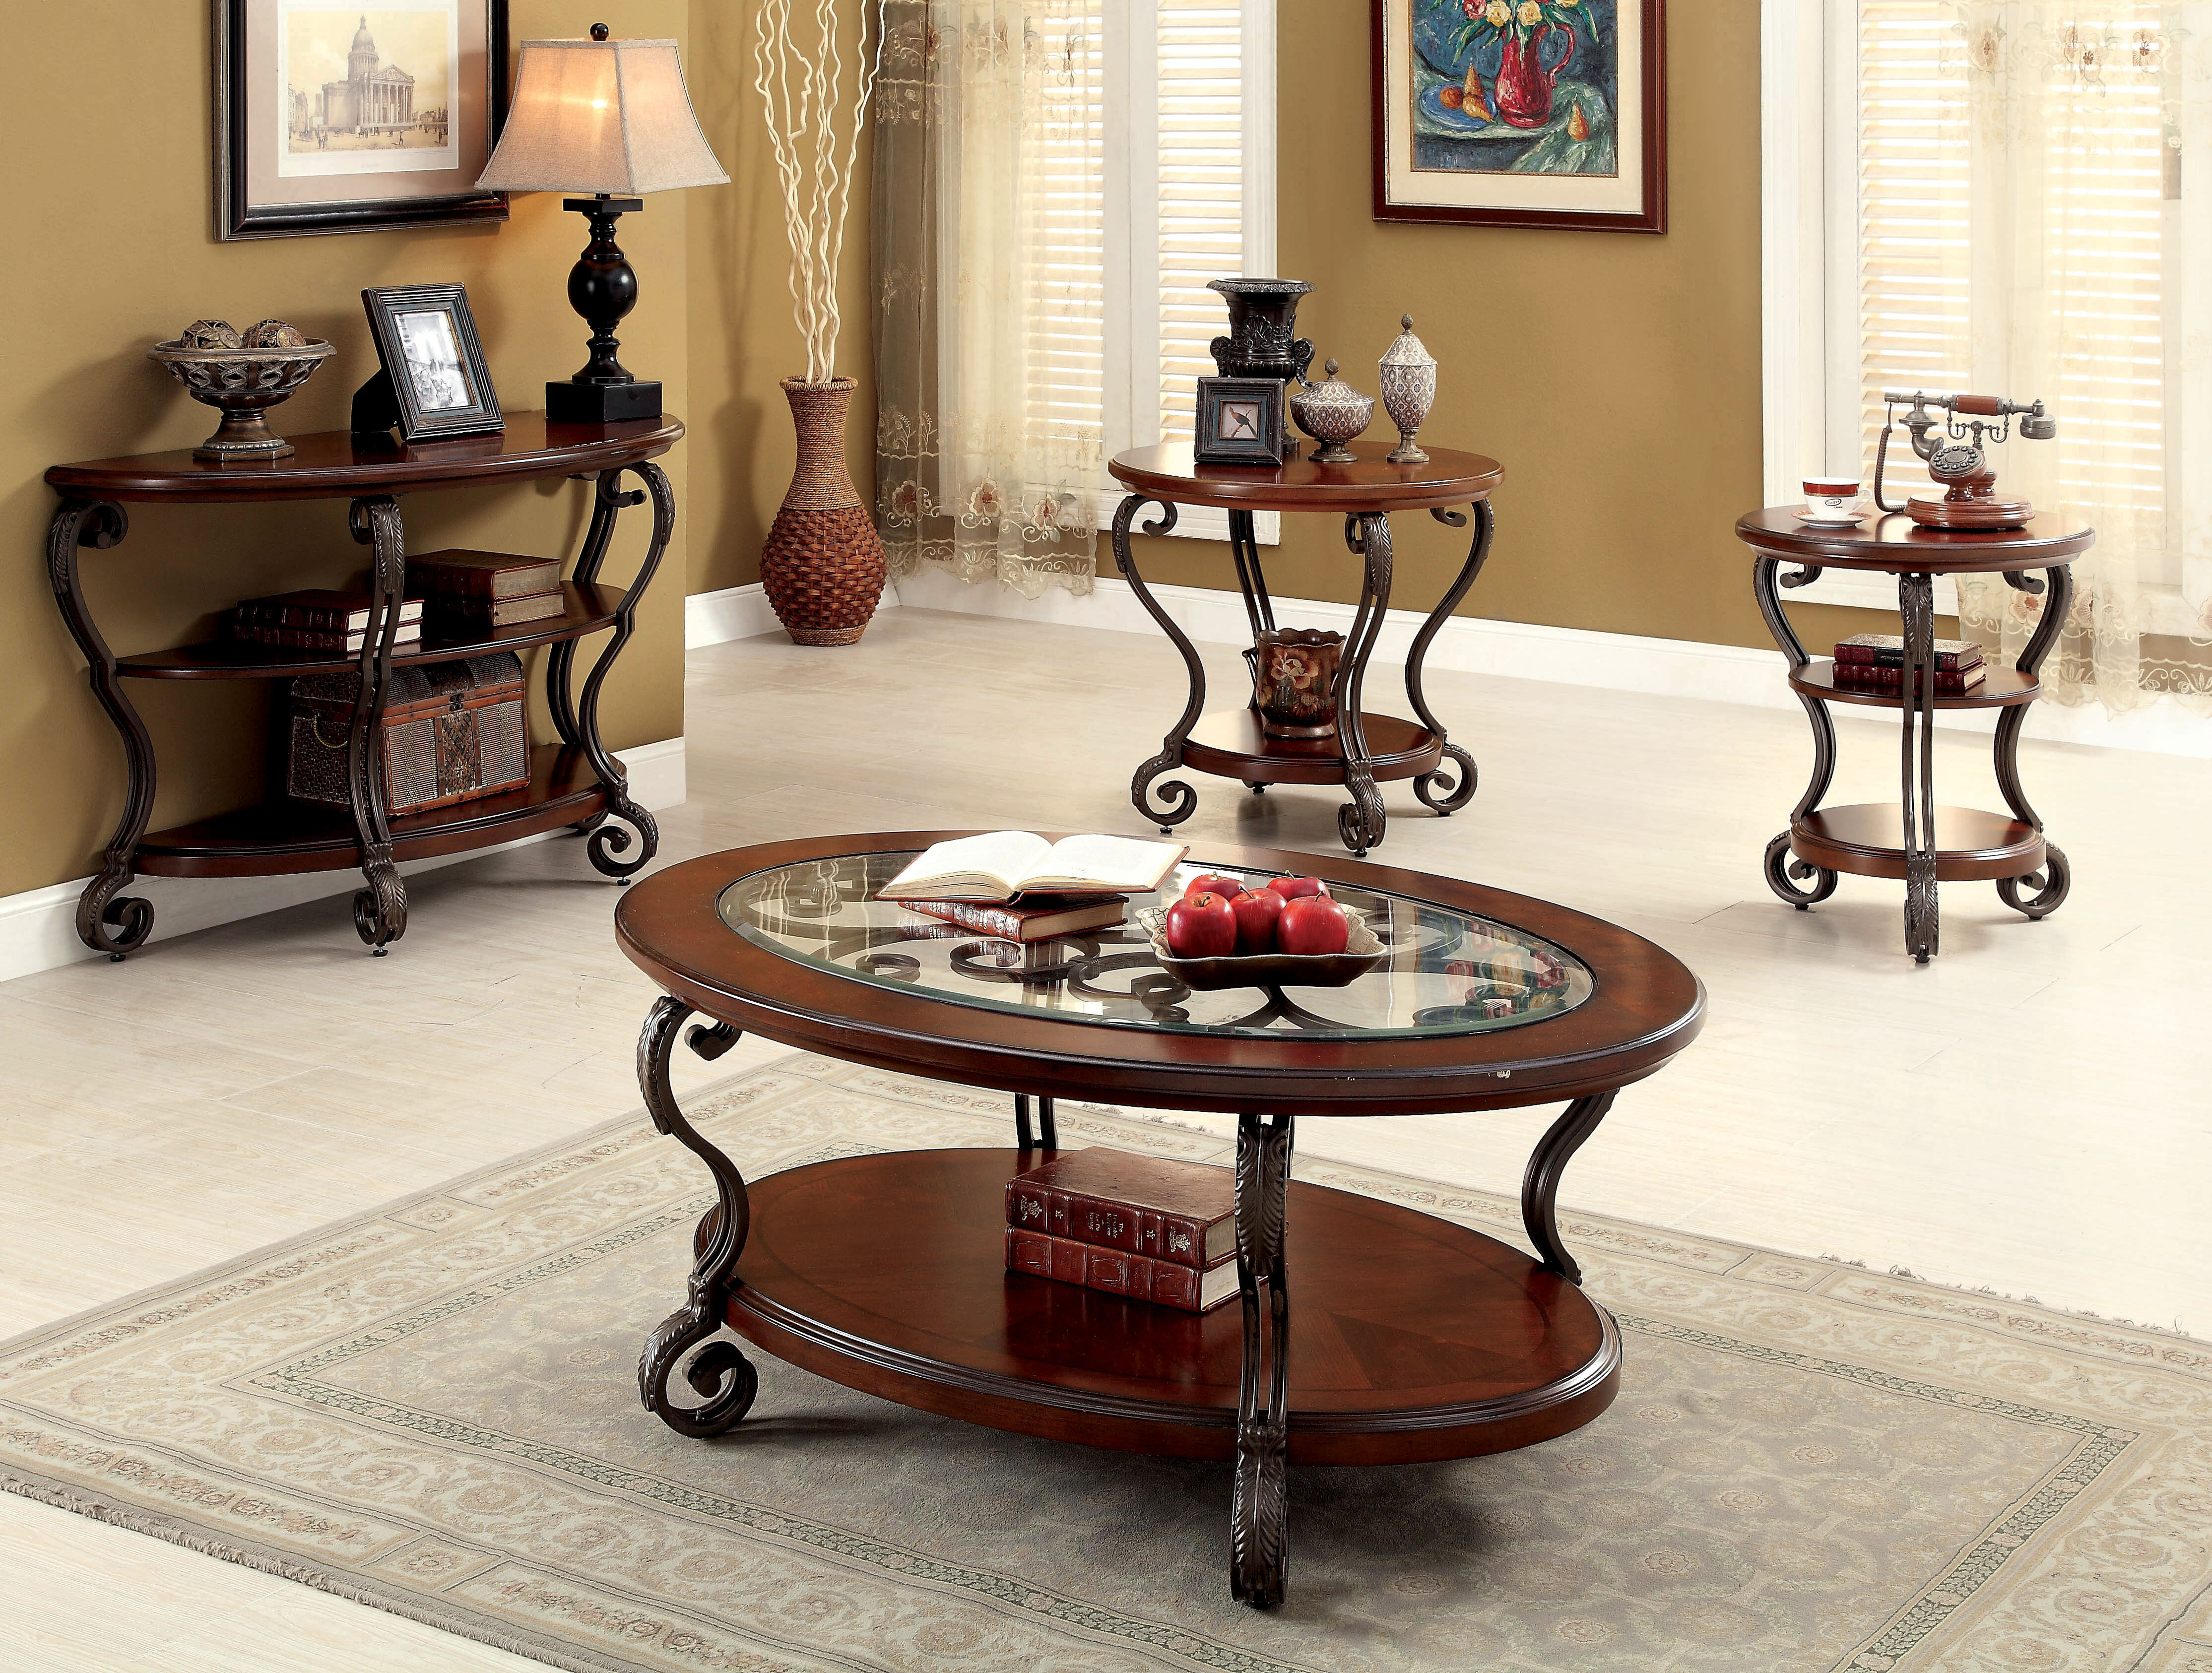 4 Piece Set Darby Home Co Coffee Table Sets Youll Love In 2021 Wayfair